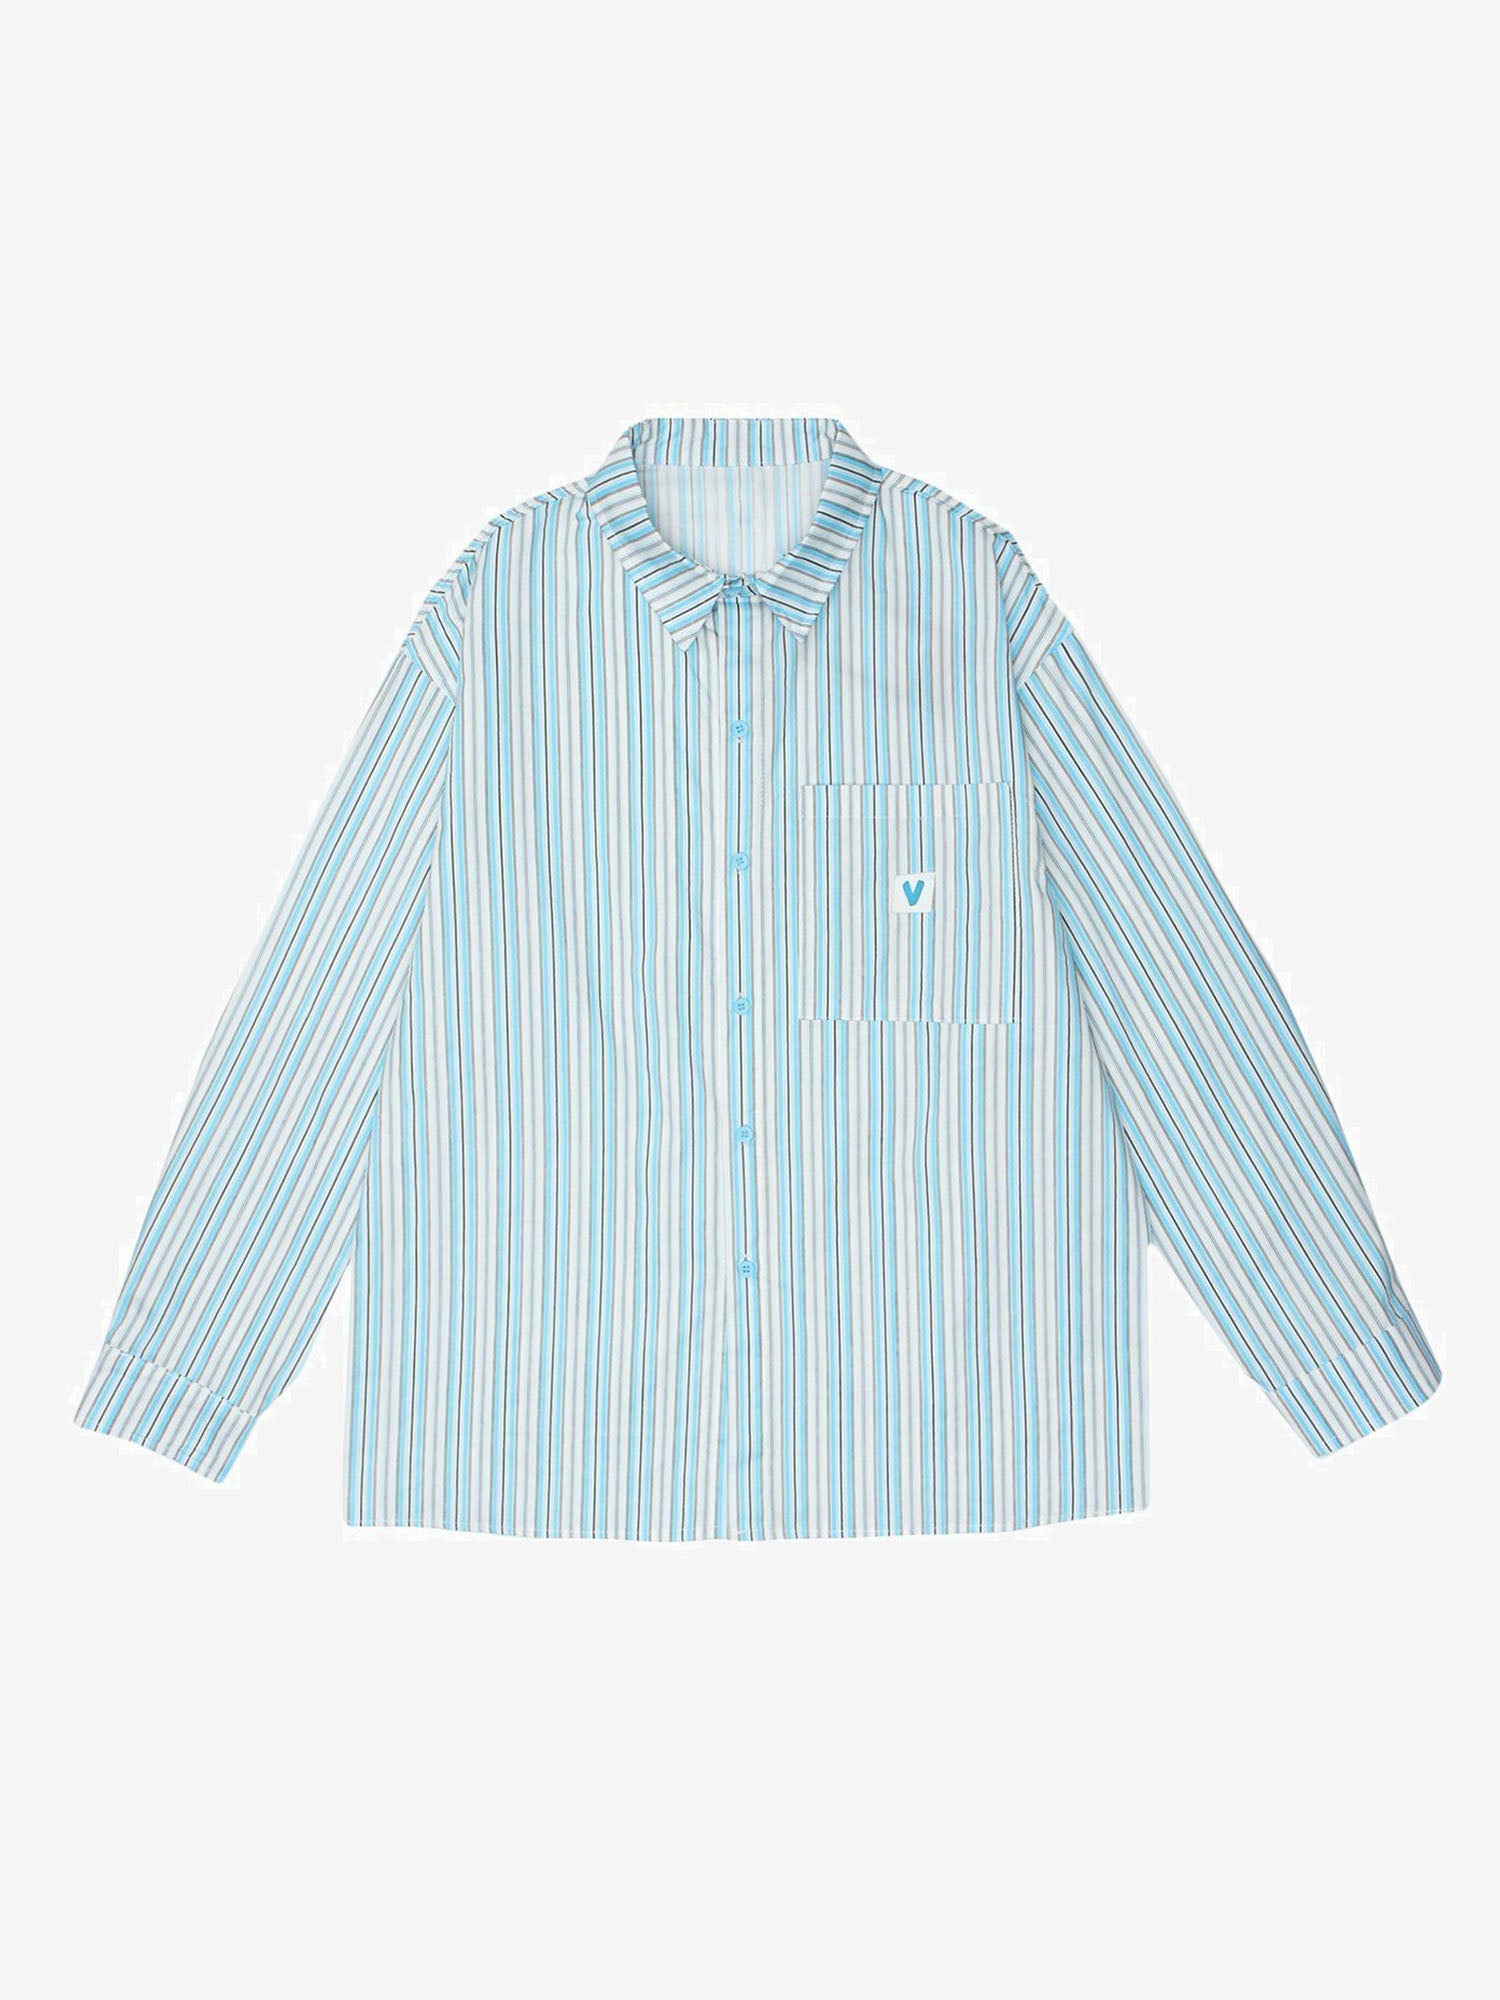 JUSTNOTAG Light Color Series Striped Long Sleeve Shirt